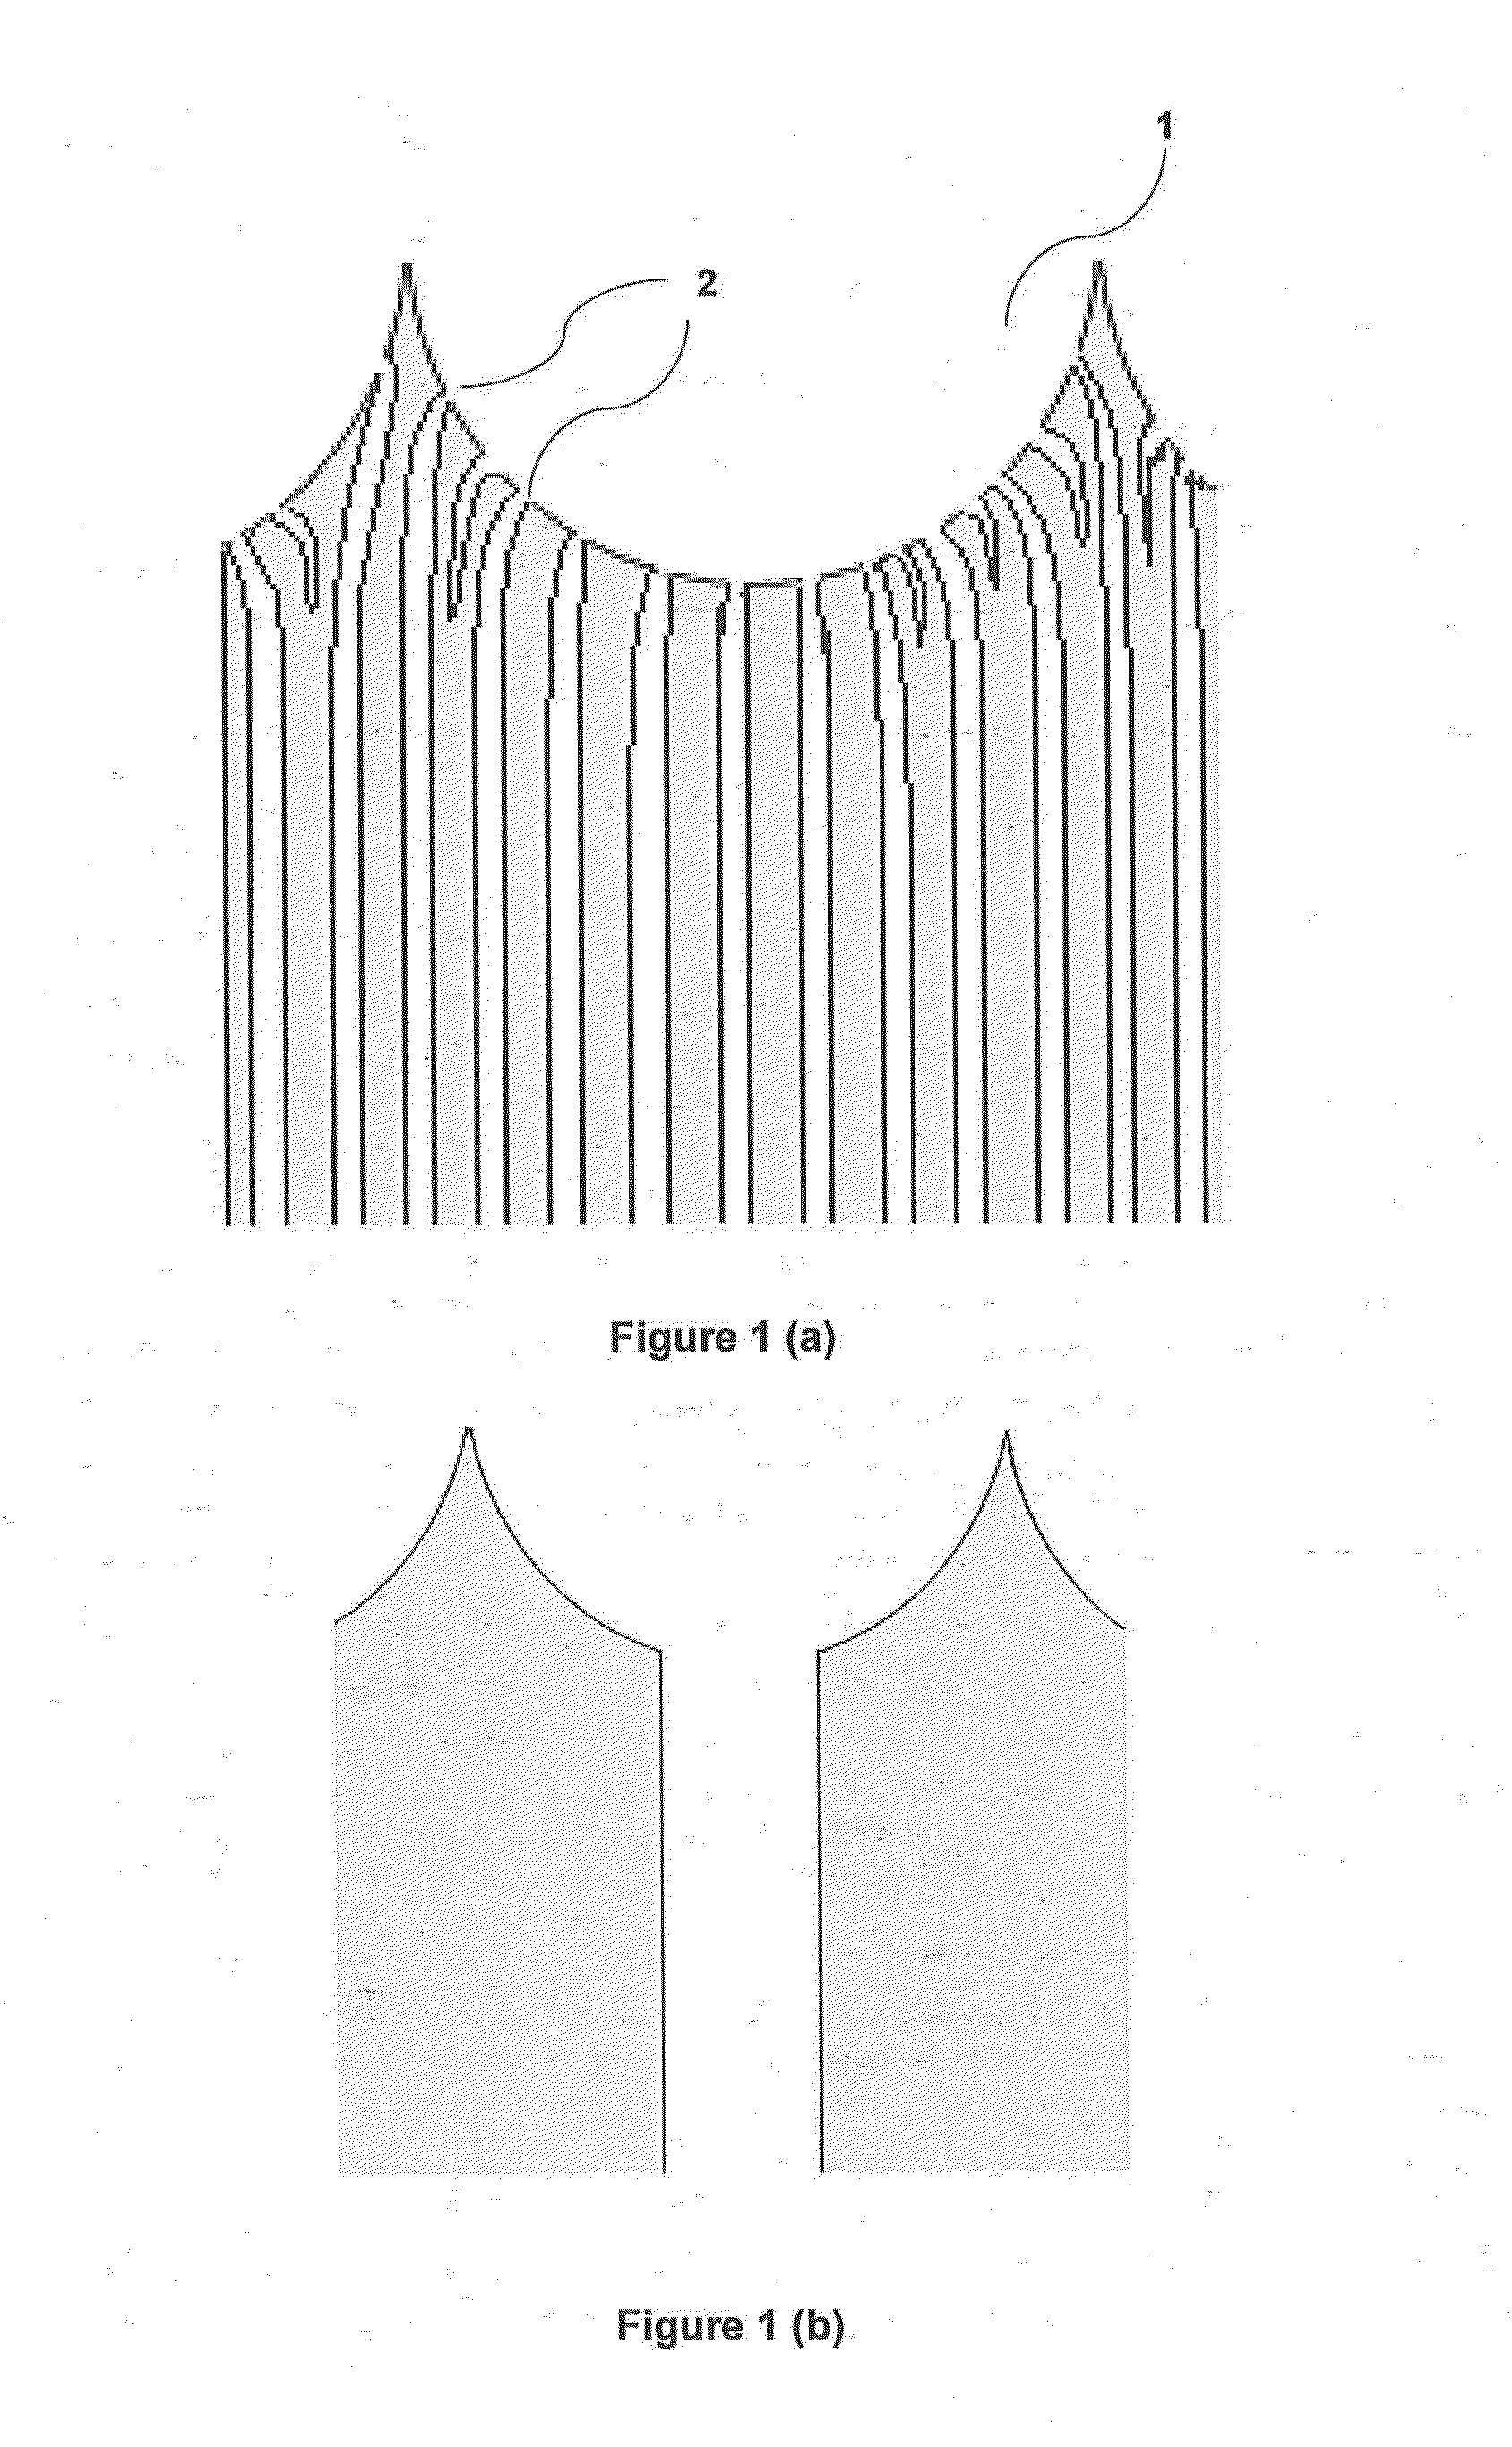 Multilayer anodized aluminium oxide nano-porous membrane and method of manufacture thereof